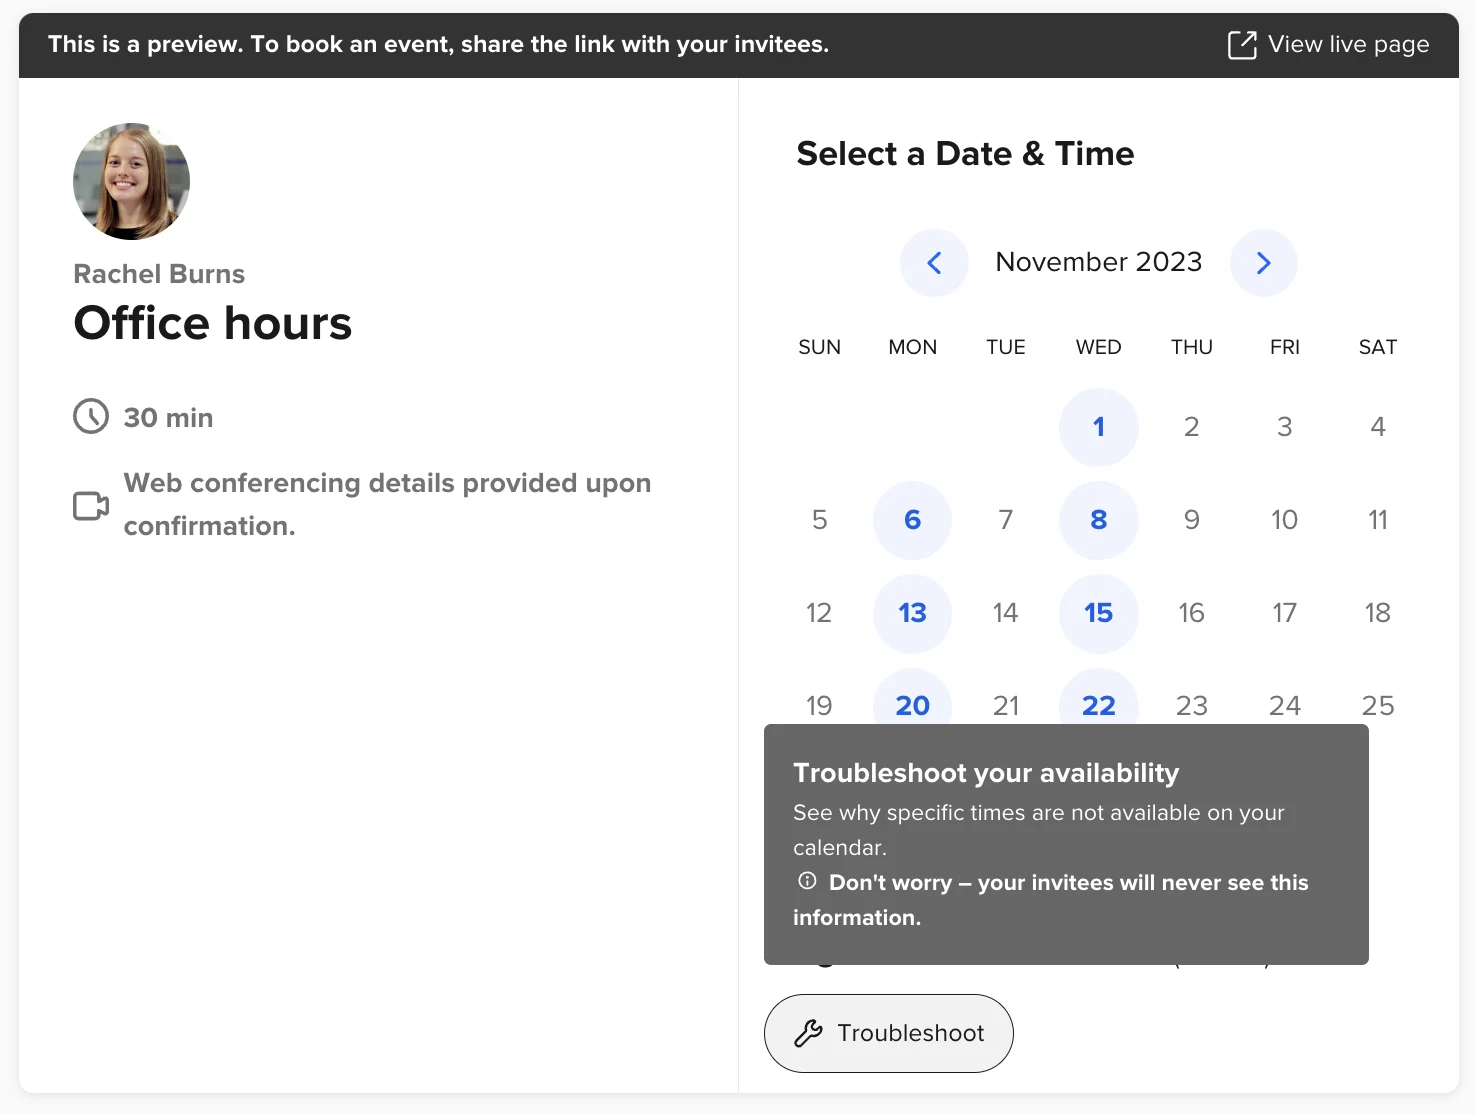 Screenshot of a Calendly booking page preview. The troubleshooting tool is selected and a "Troubleshoot your availability" message is displayed.